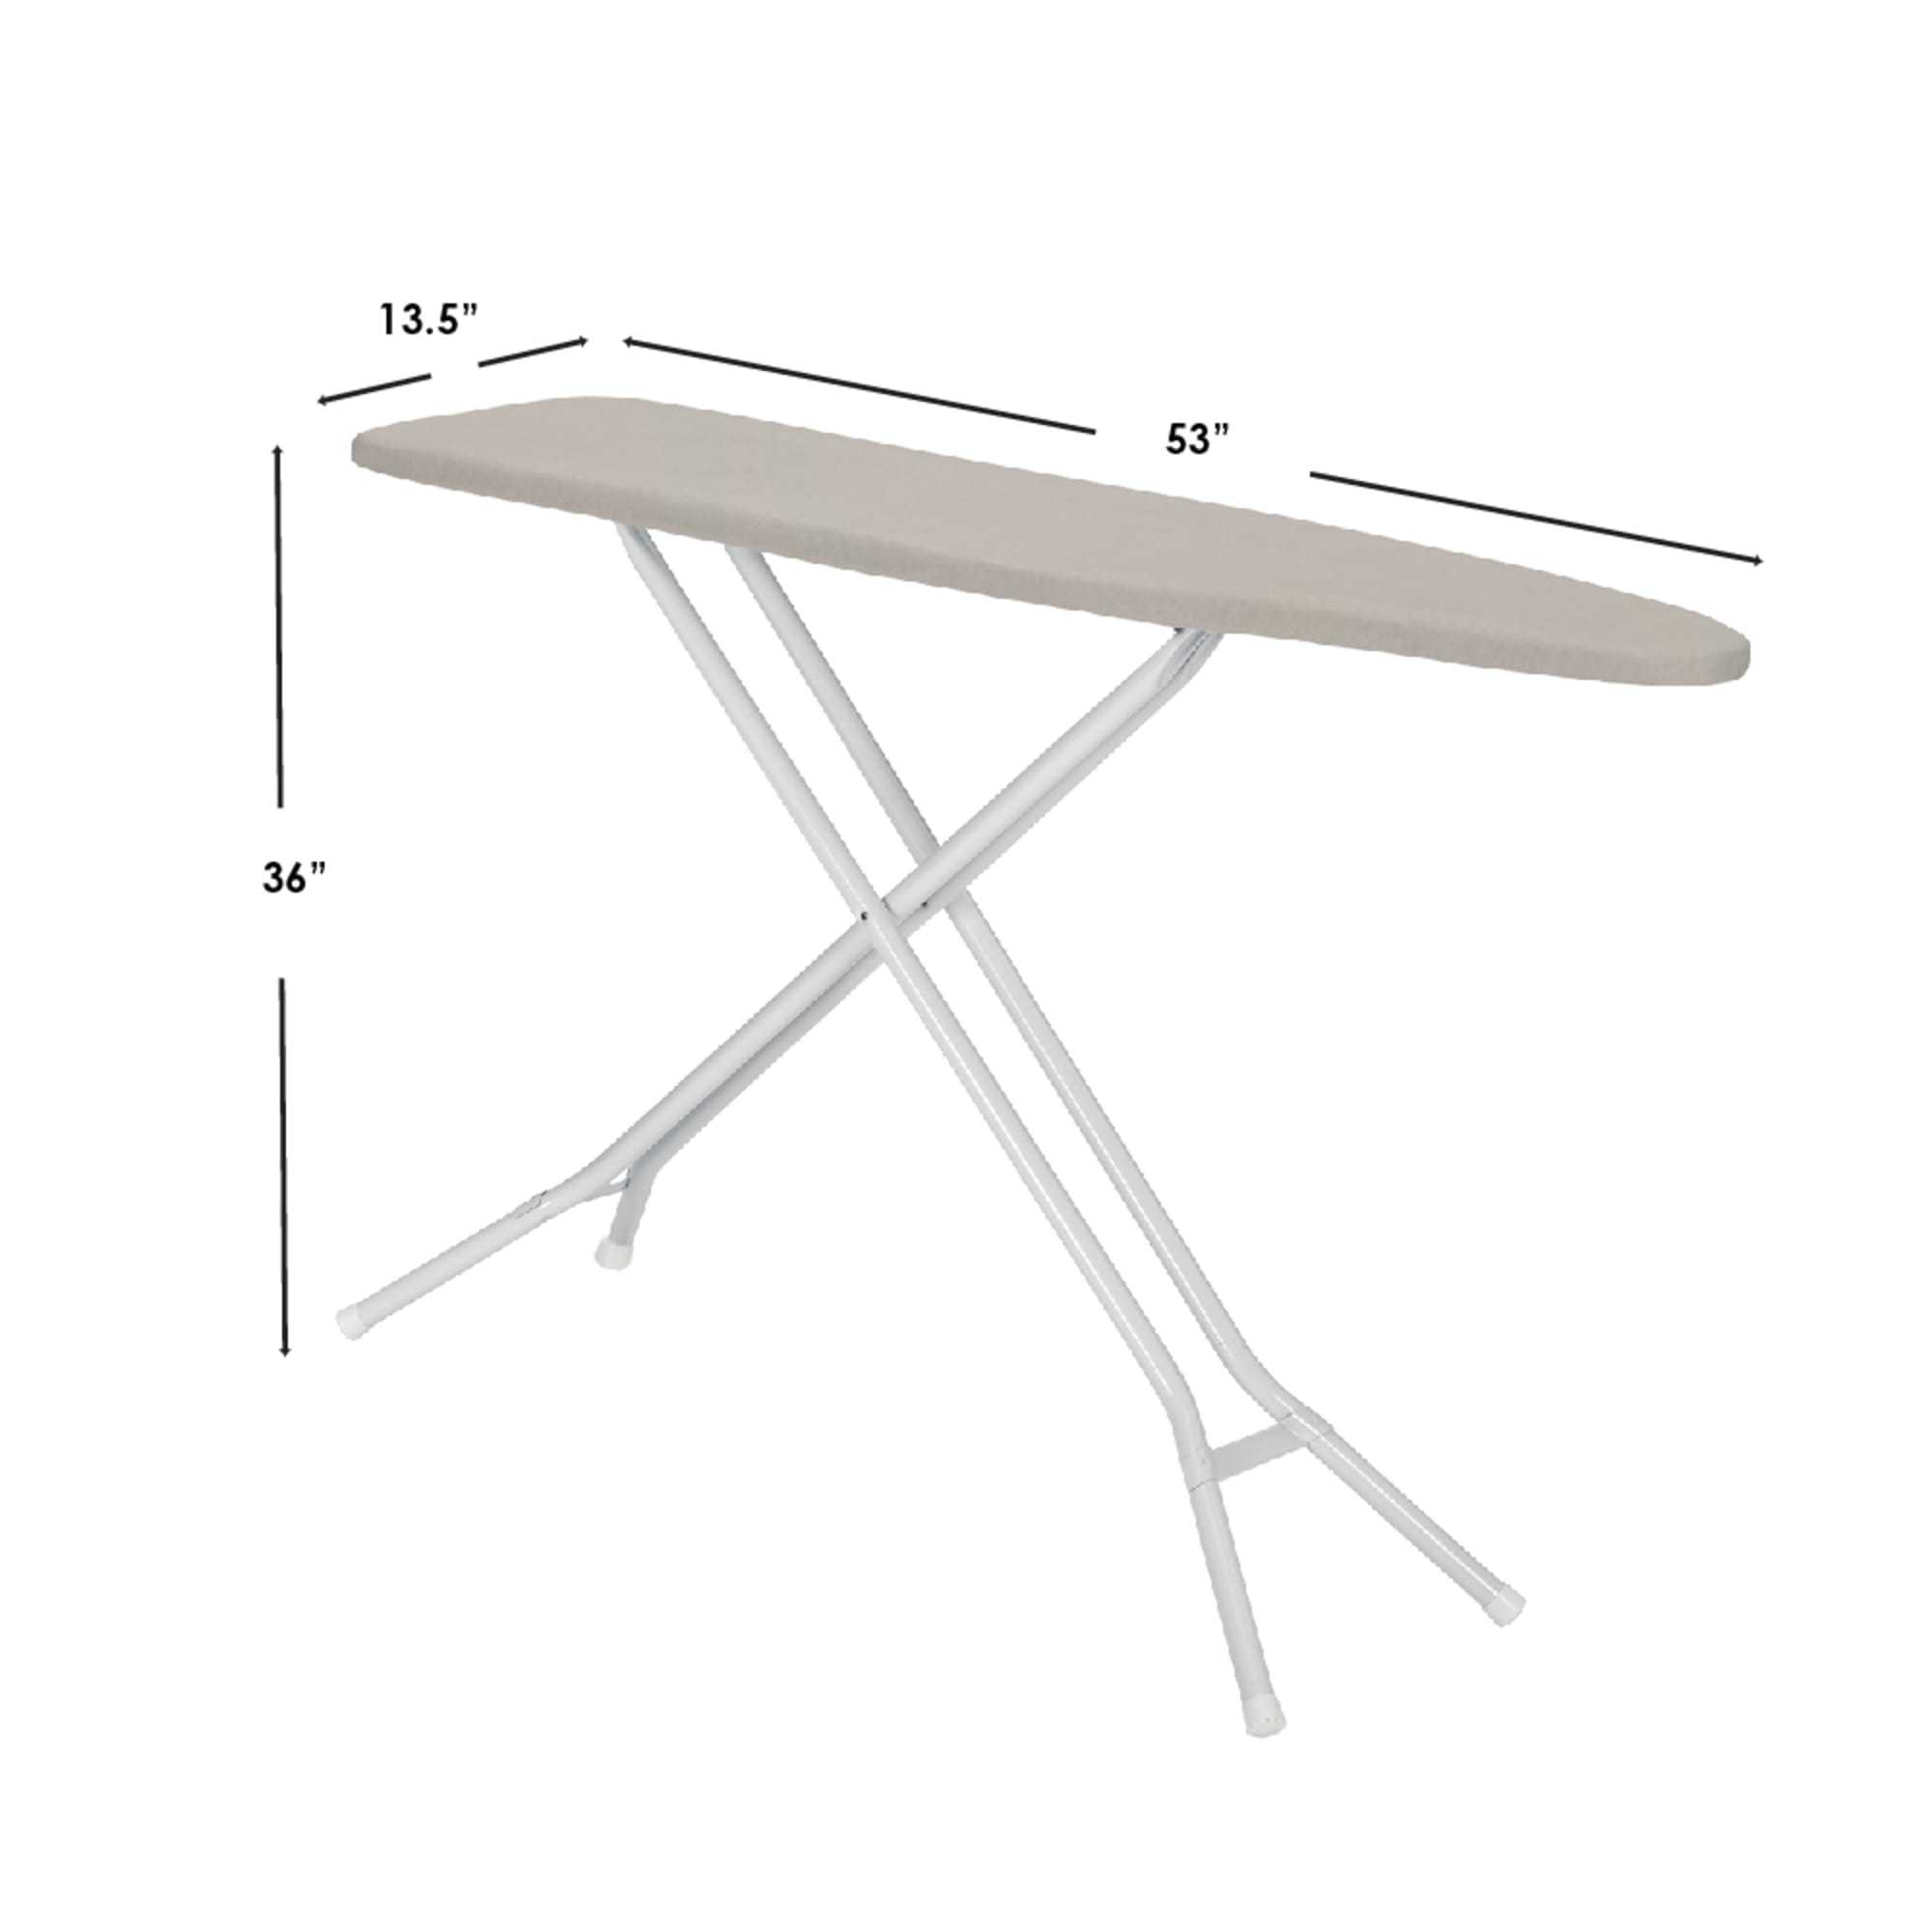 Seymour Home Products Adjustable Height, 4-Leg Ironing Board with Perforated Top, Space Grey $30 EACH, CASE PACK OF 1